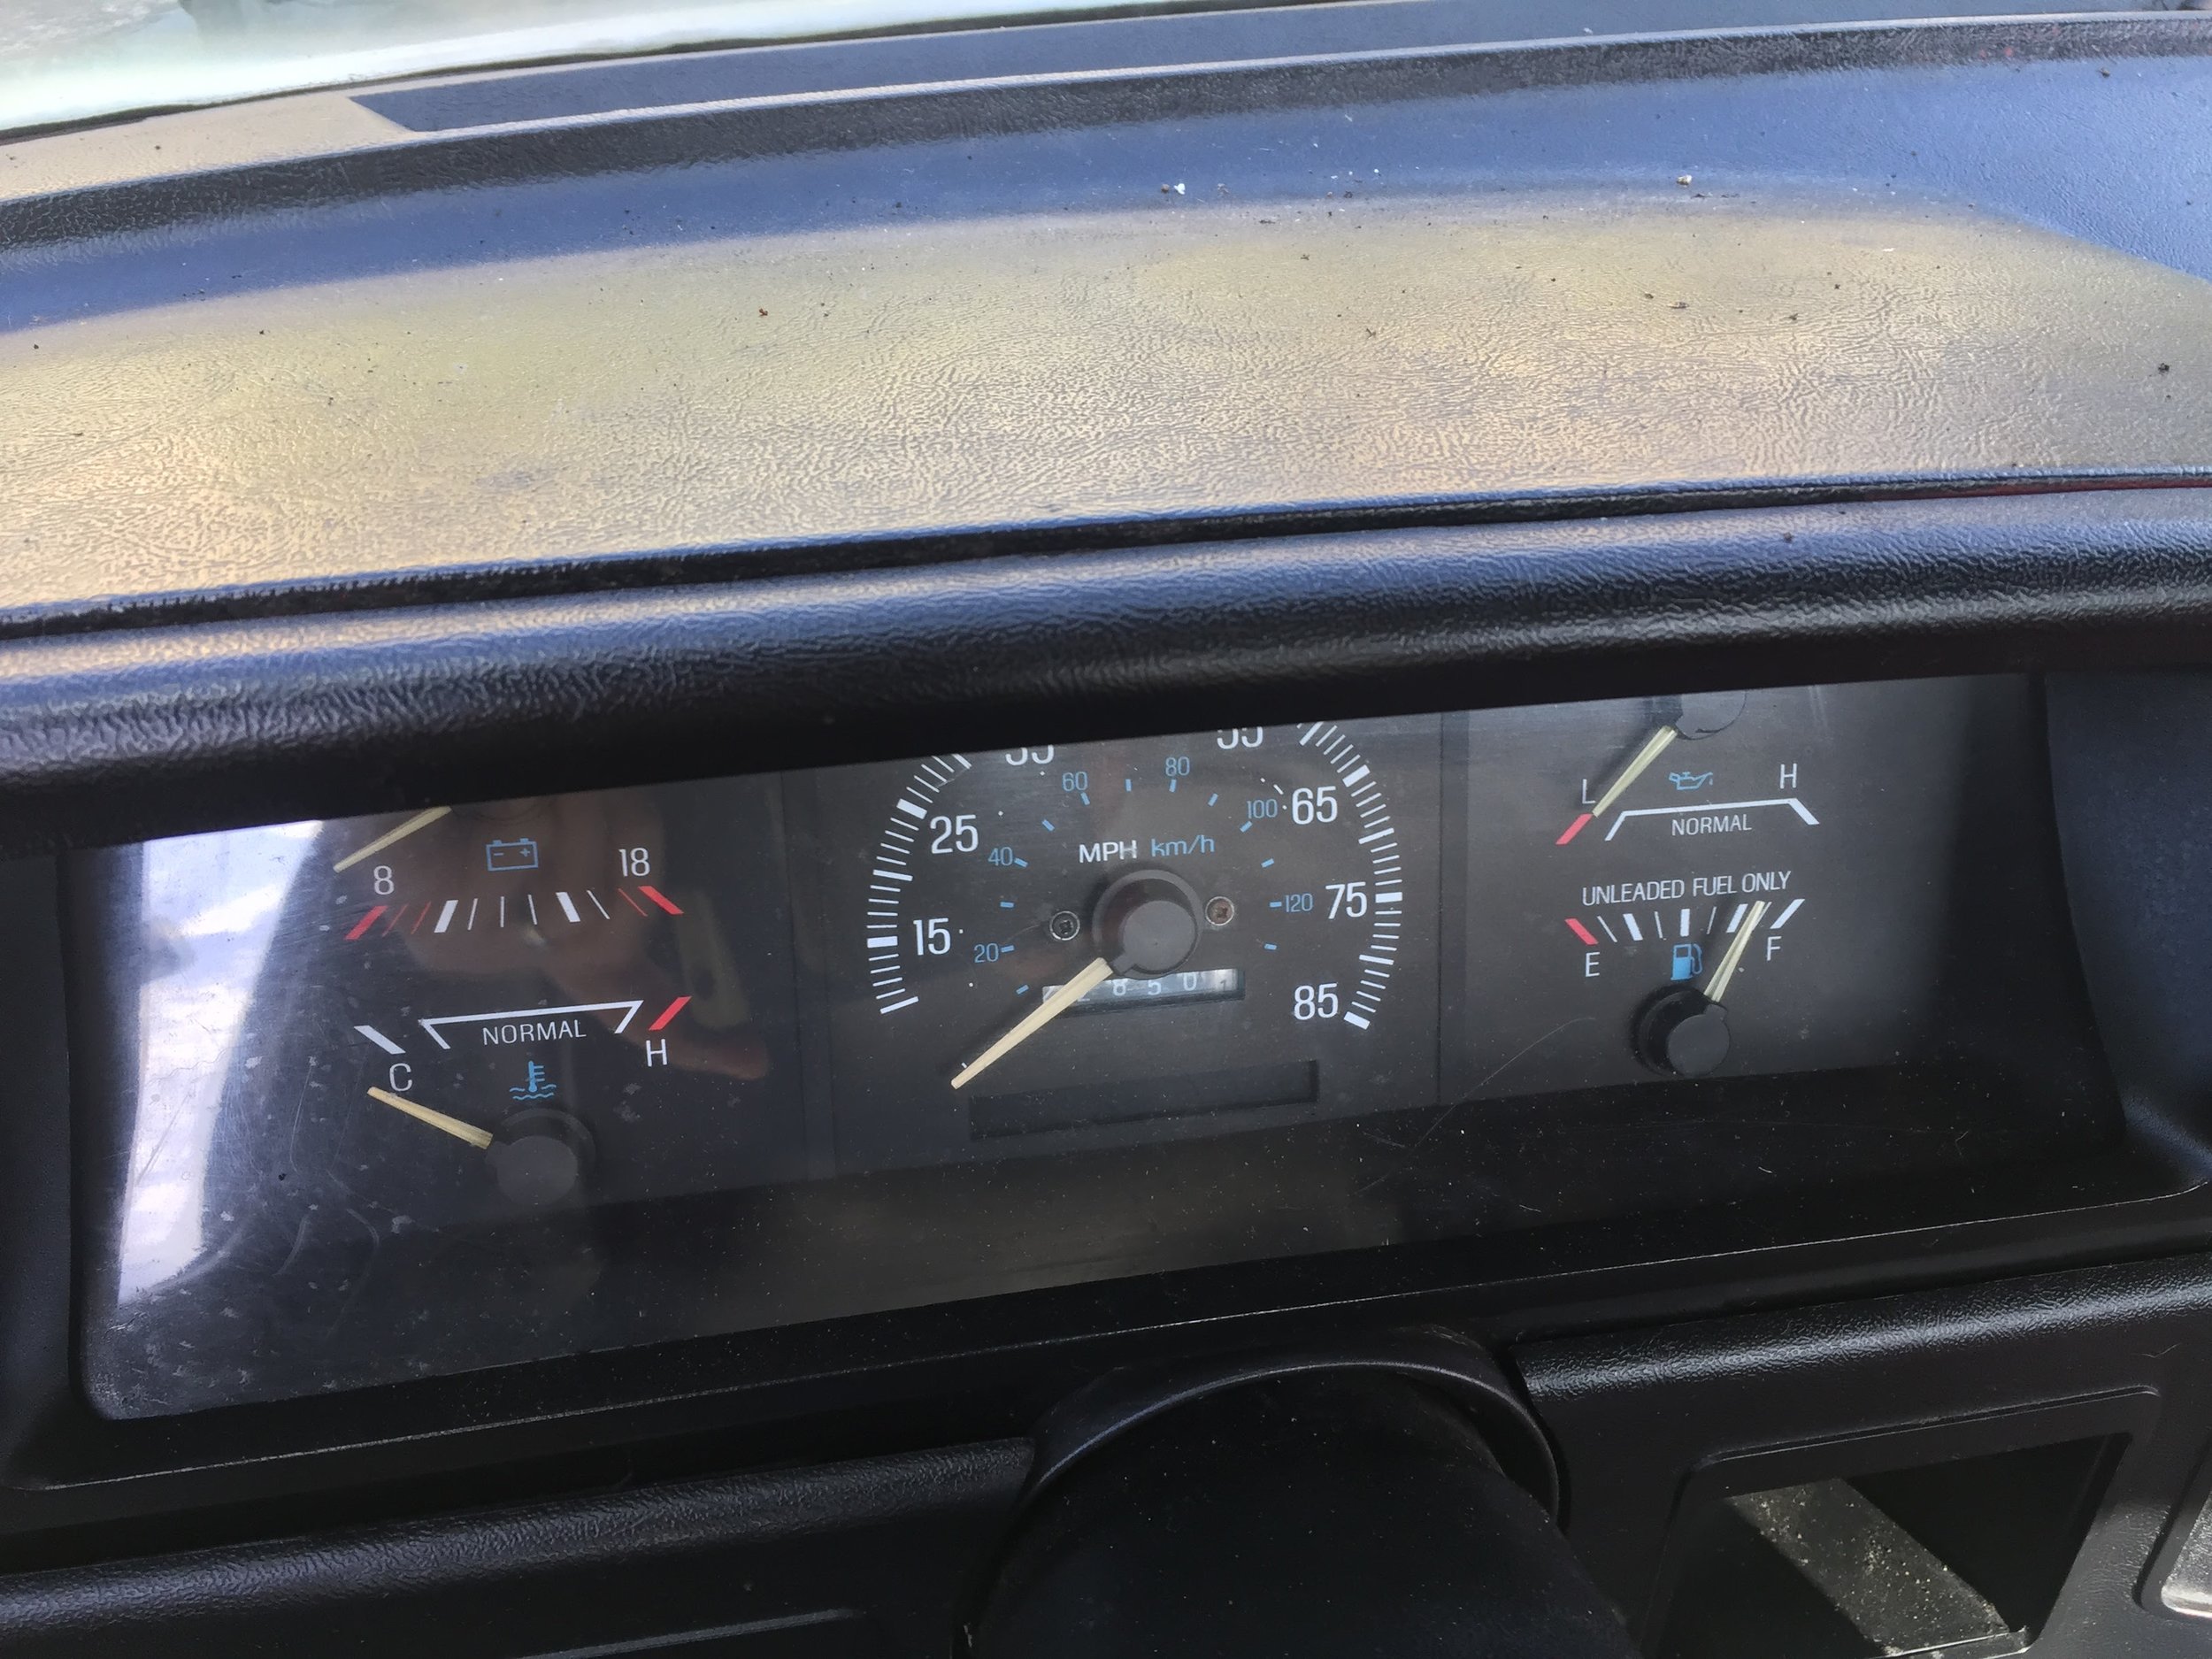 Now that's a dashboard